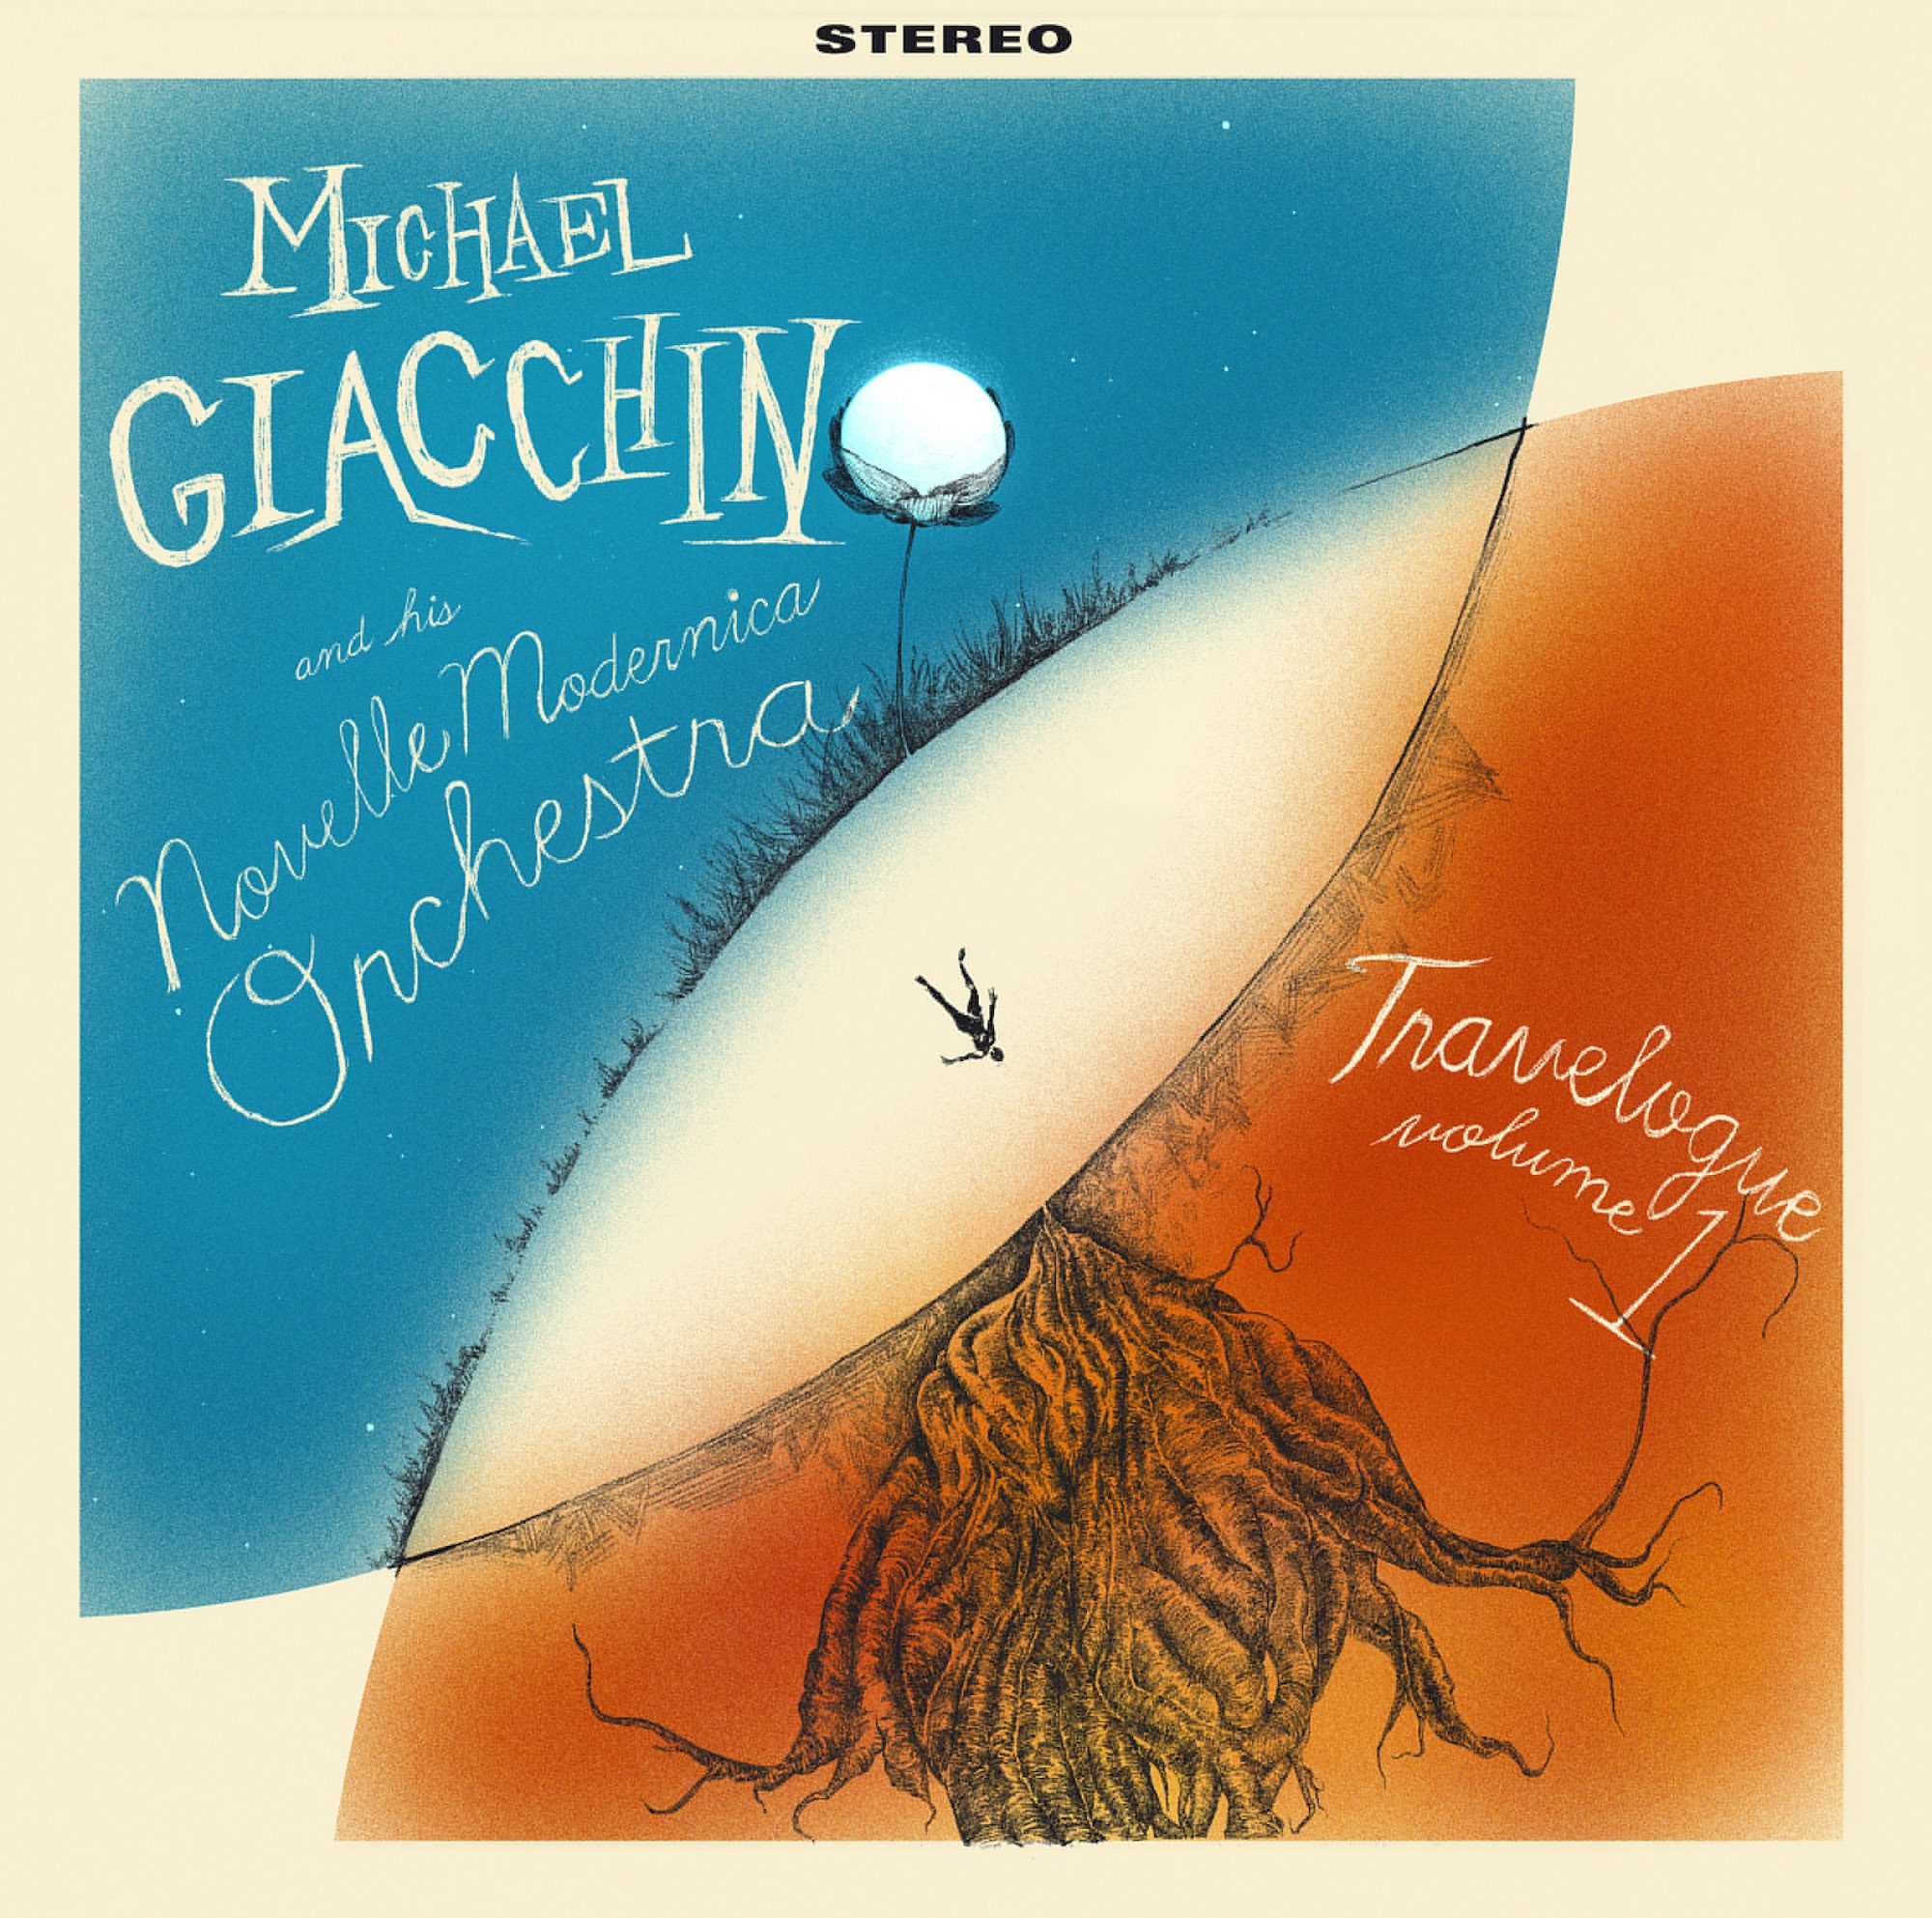 Featured image for “Michael Giacchino’s debut solo album released October 30”